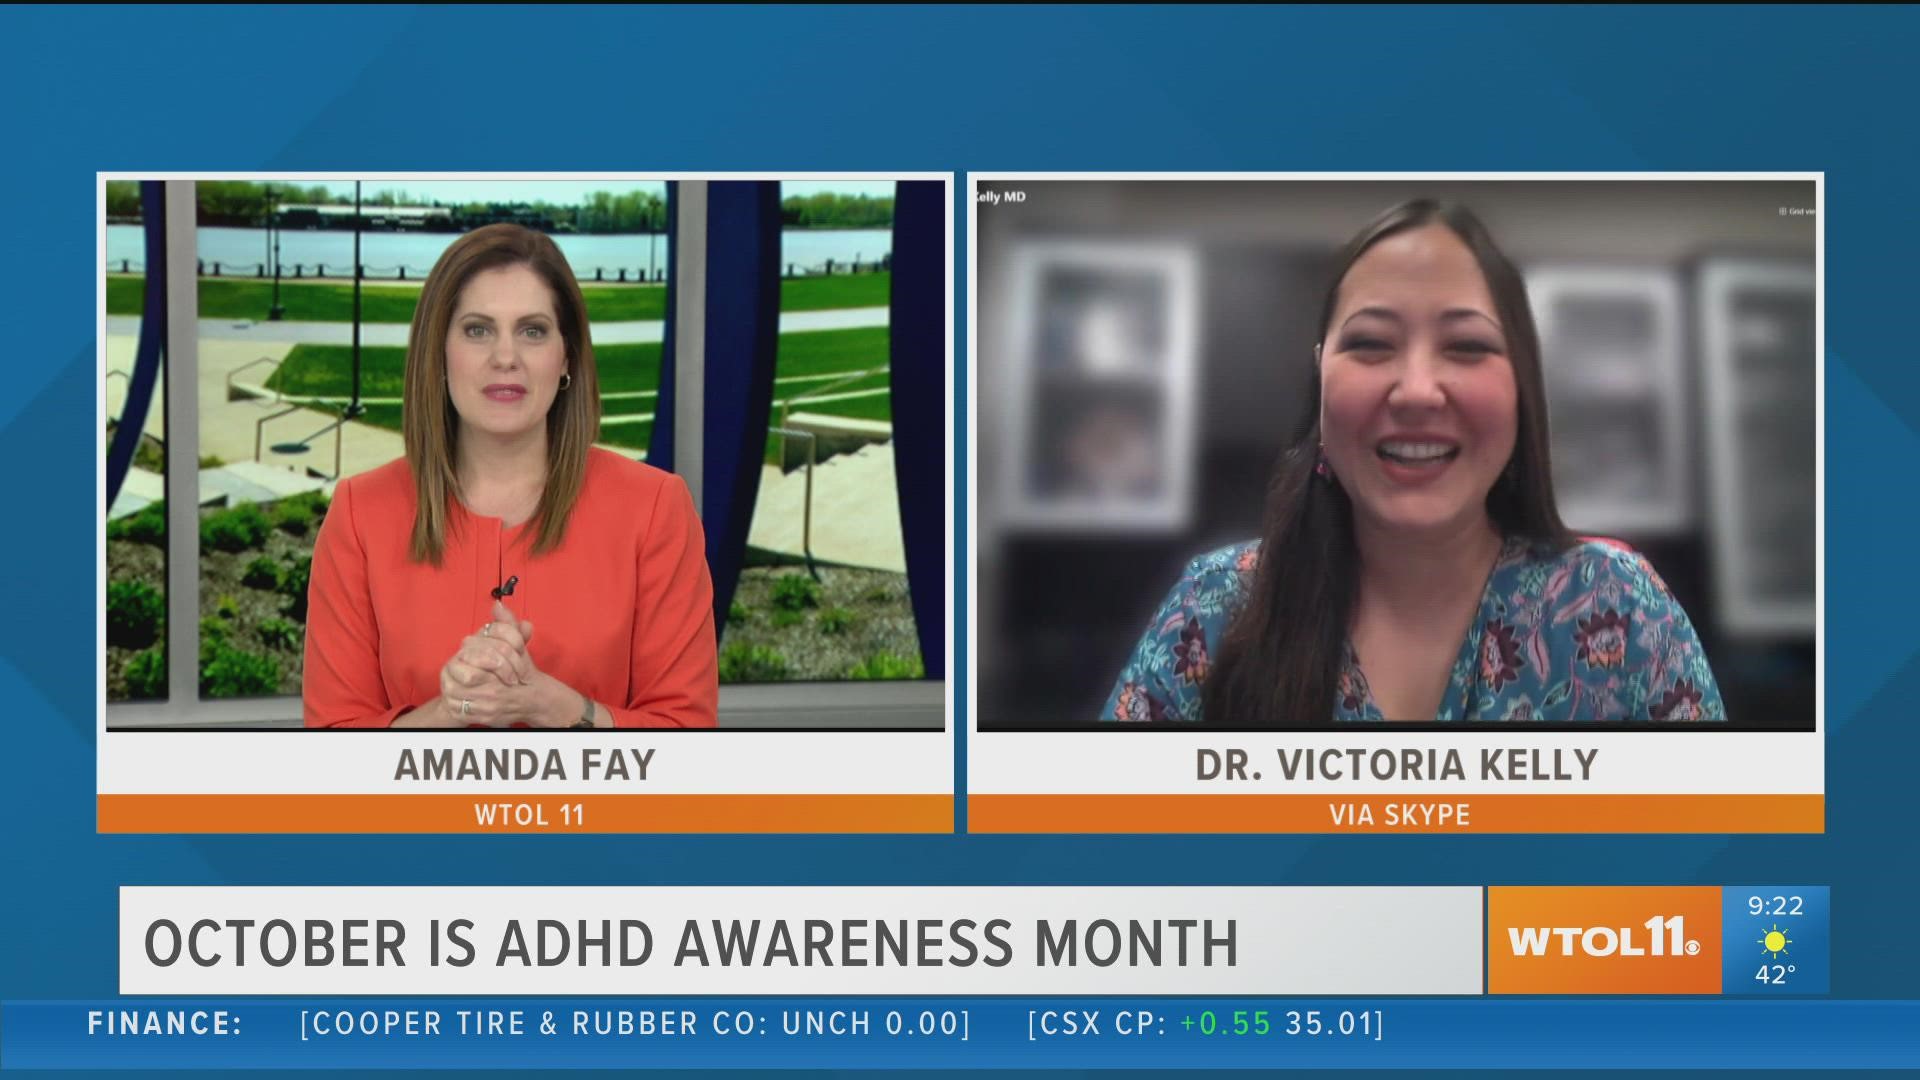 October is ADHD Awareness Month, and Dr. Victoria Kelly has some facts you might not know about ADHD.